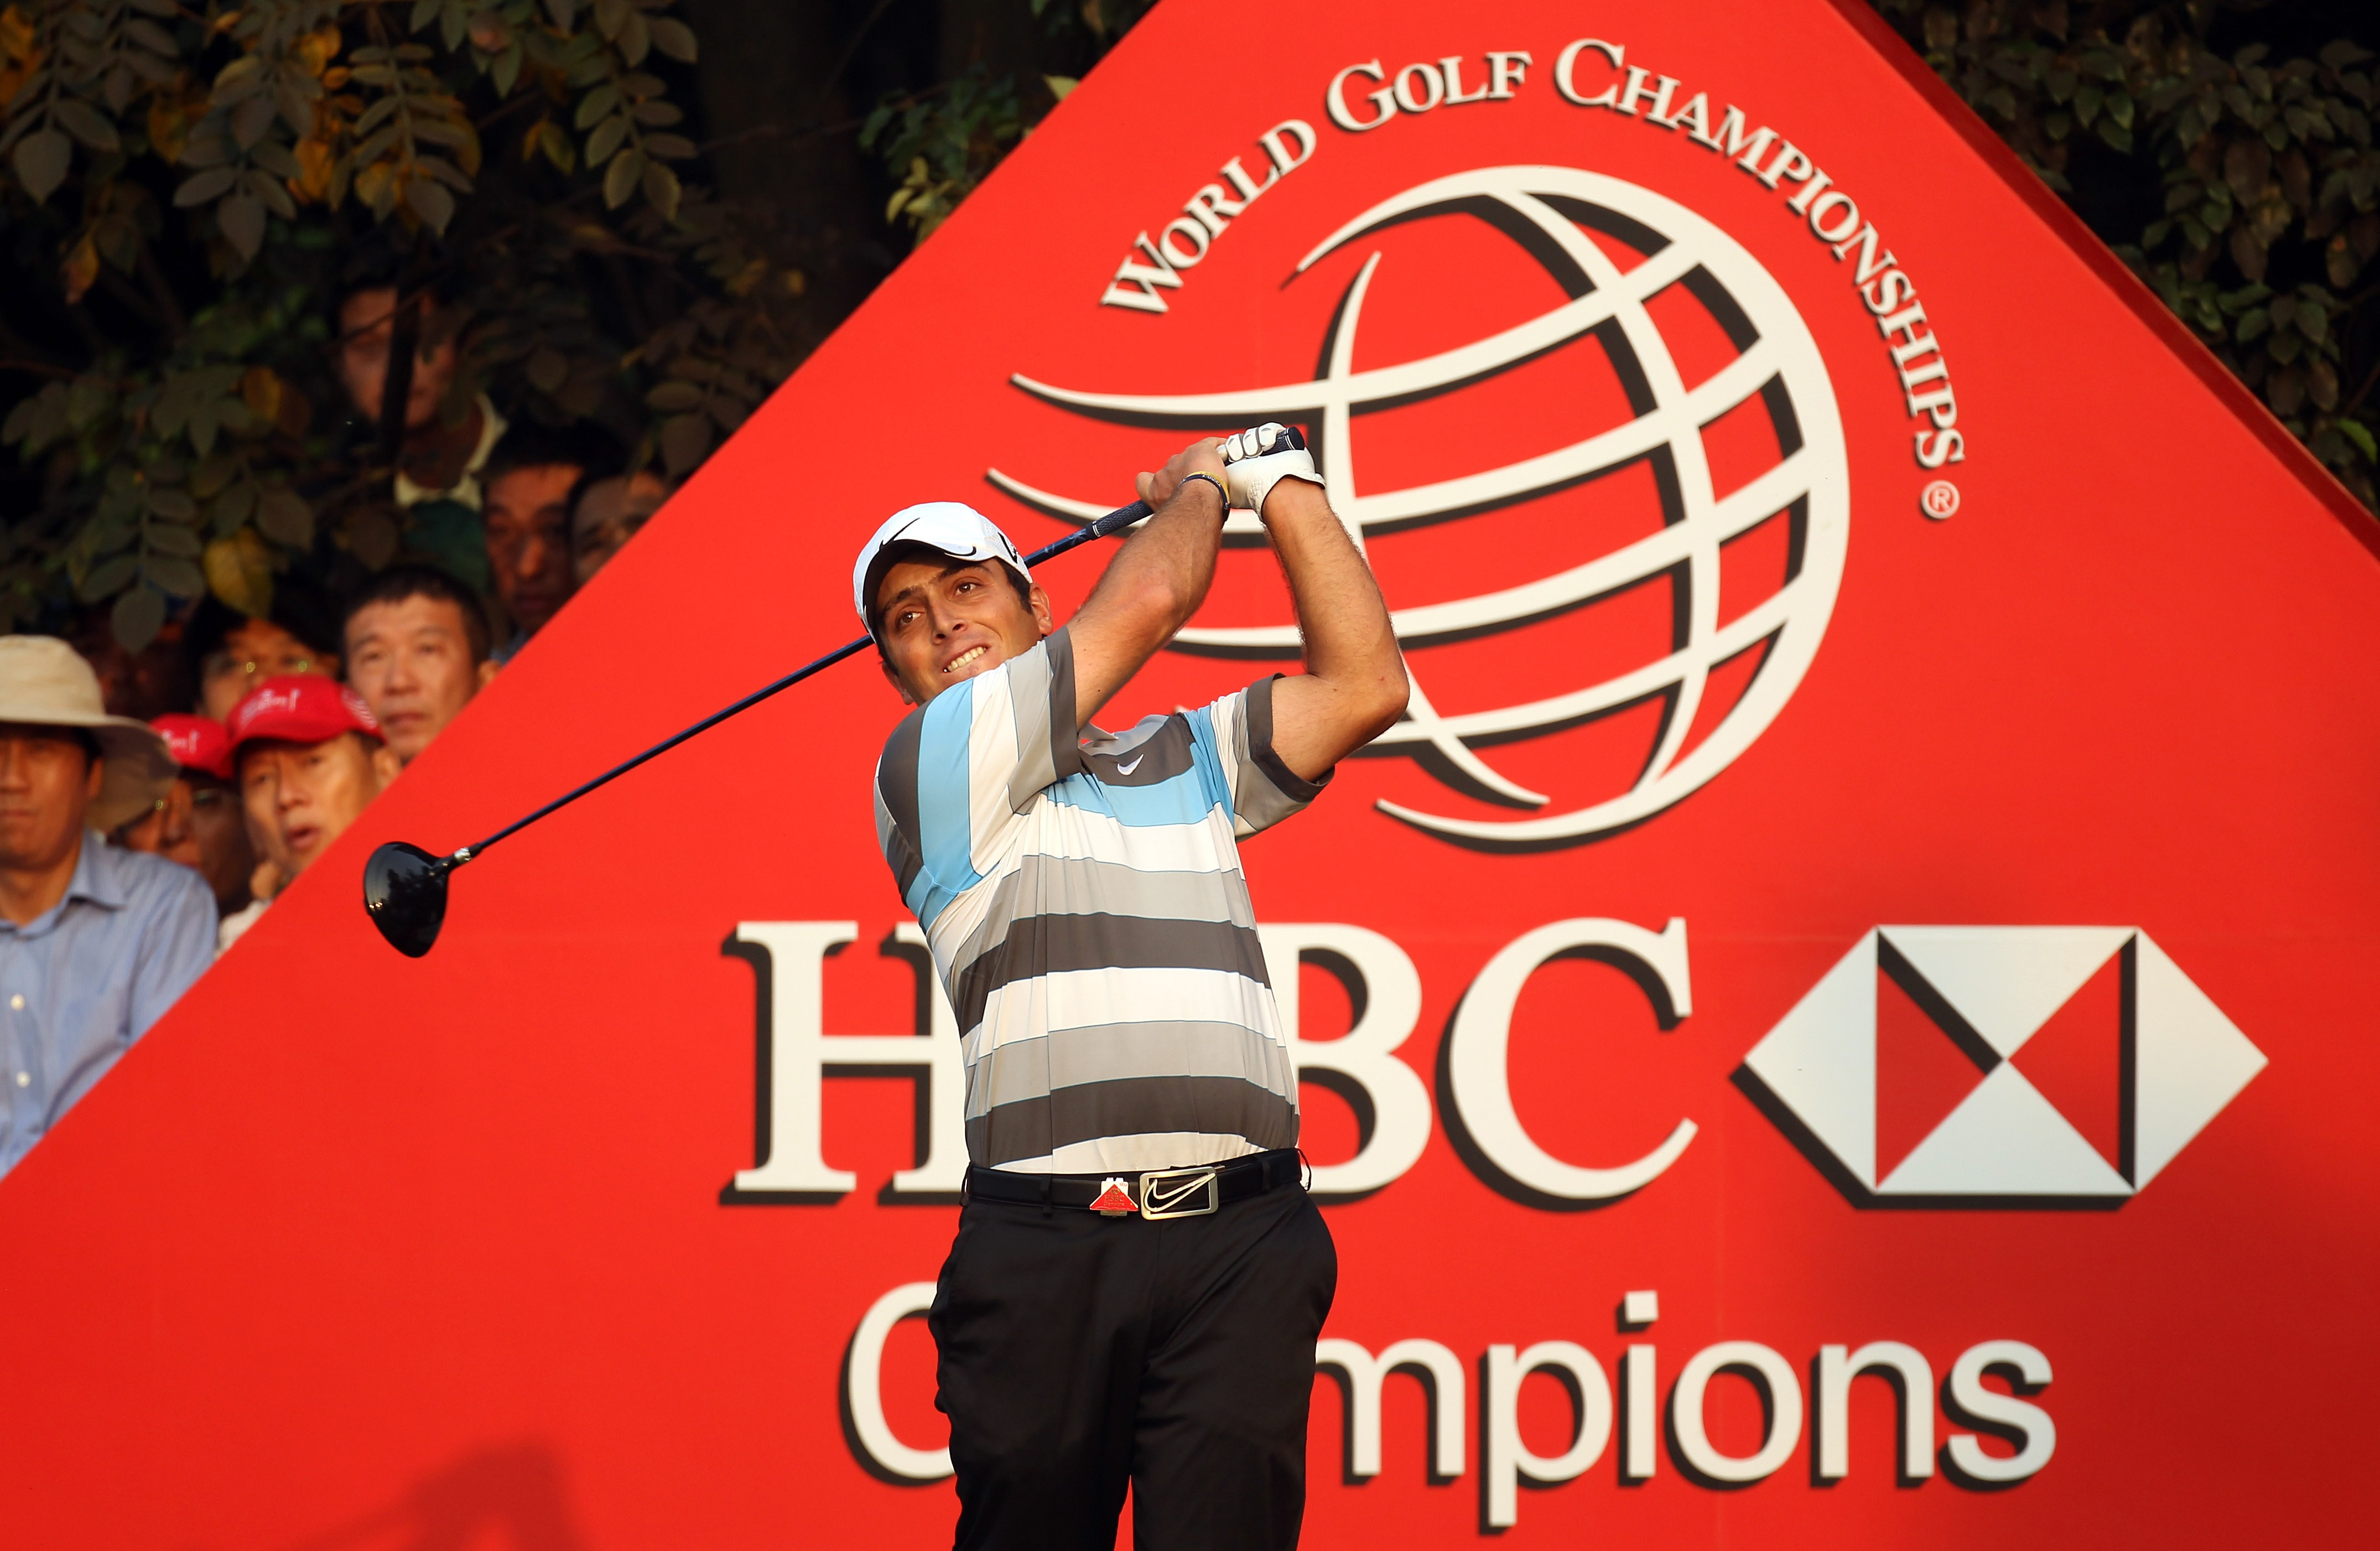 SHANGHAI, CHINA - NOVEMBER 07:  Francesco Molinari of Italy during the final round of  the WGC - HSBC Champions at Sheshan International Golf Club on November 7, 2010 in Shanghai, China.  (Photo by Ross Kinnaird/Getty Images)